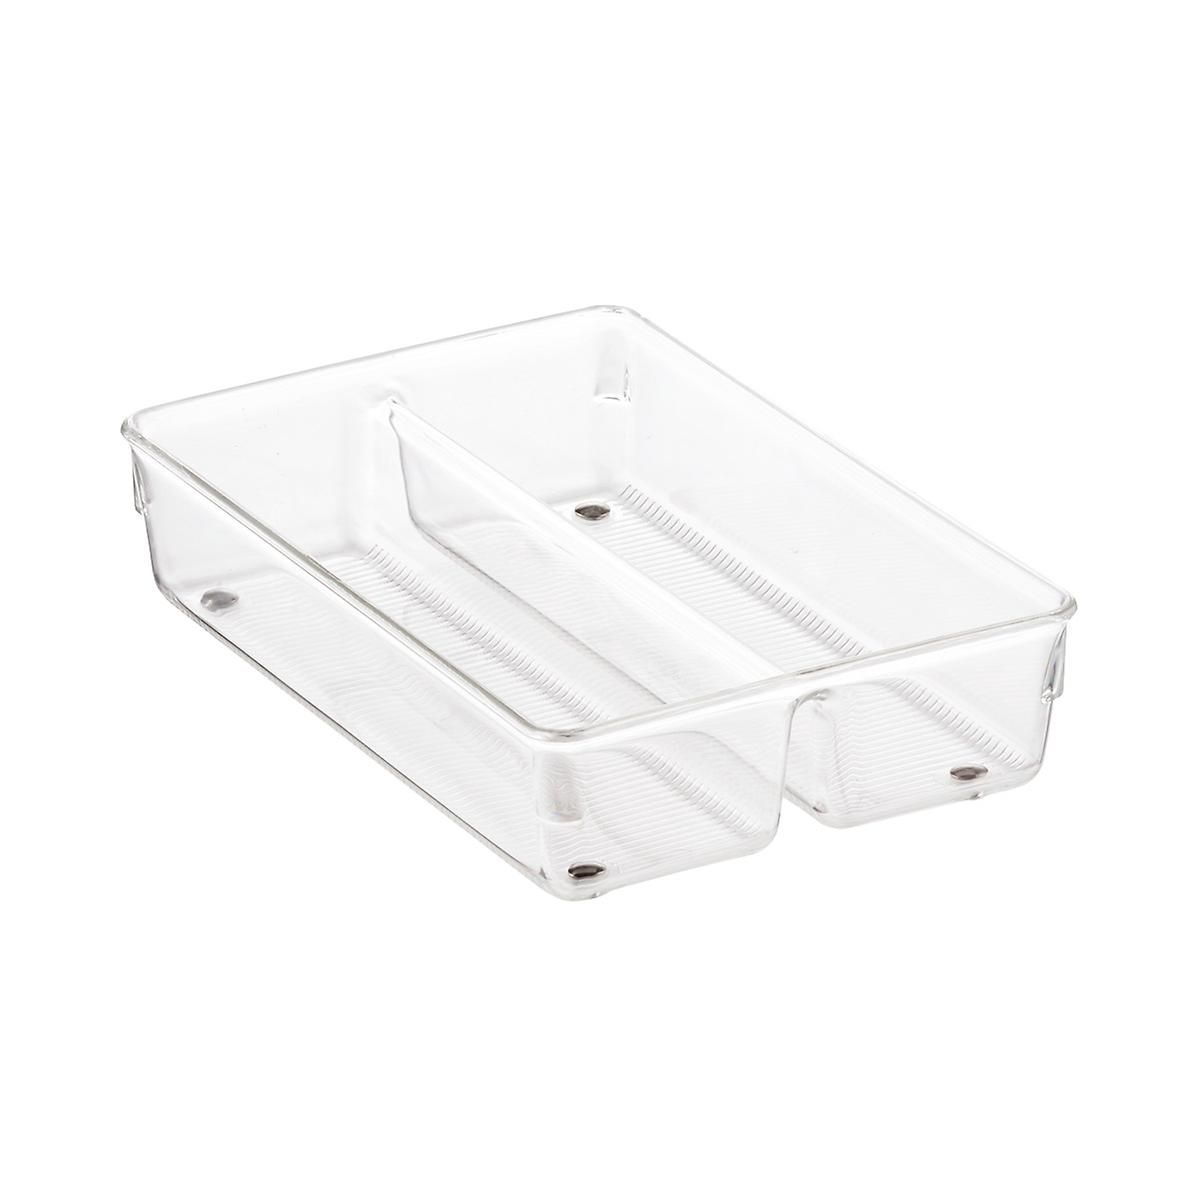 IDesign Linus 2-Section Drawer Organizers | The Container Store